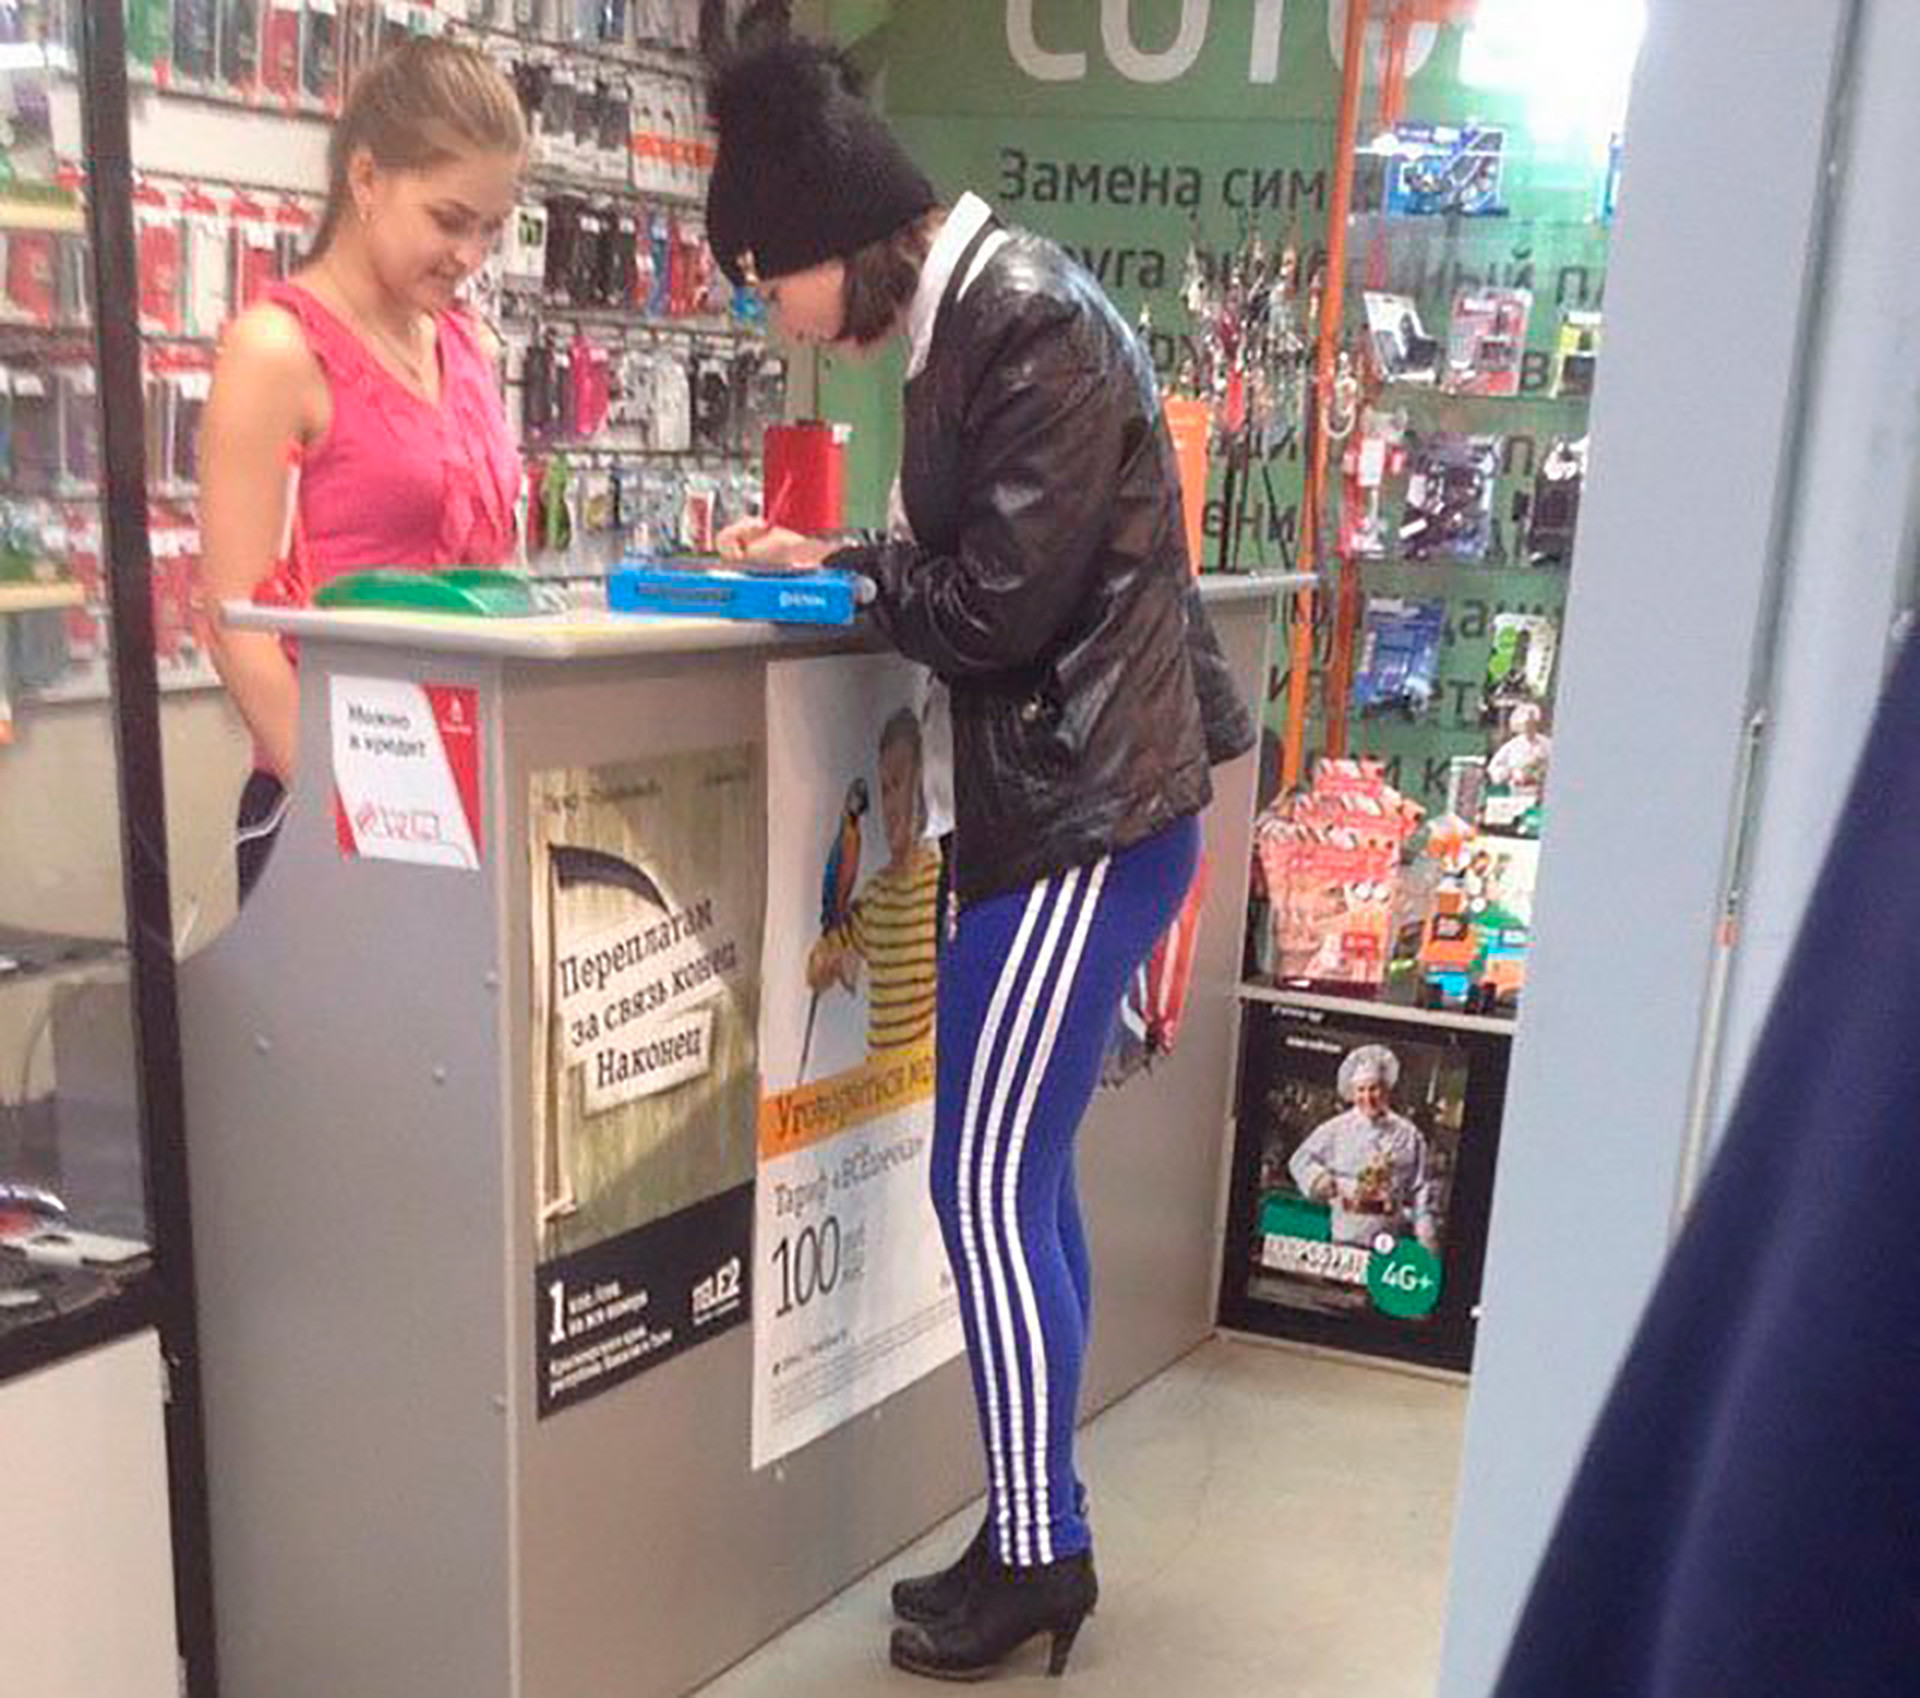 Sometimes Adidas goes even with high heels. (In fact, it doesn't at all but who cares, it's Russia).